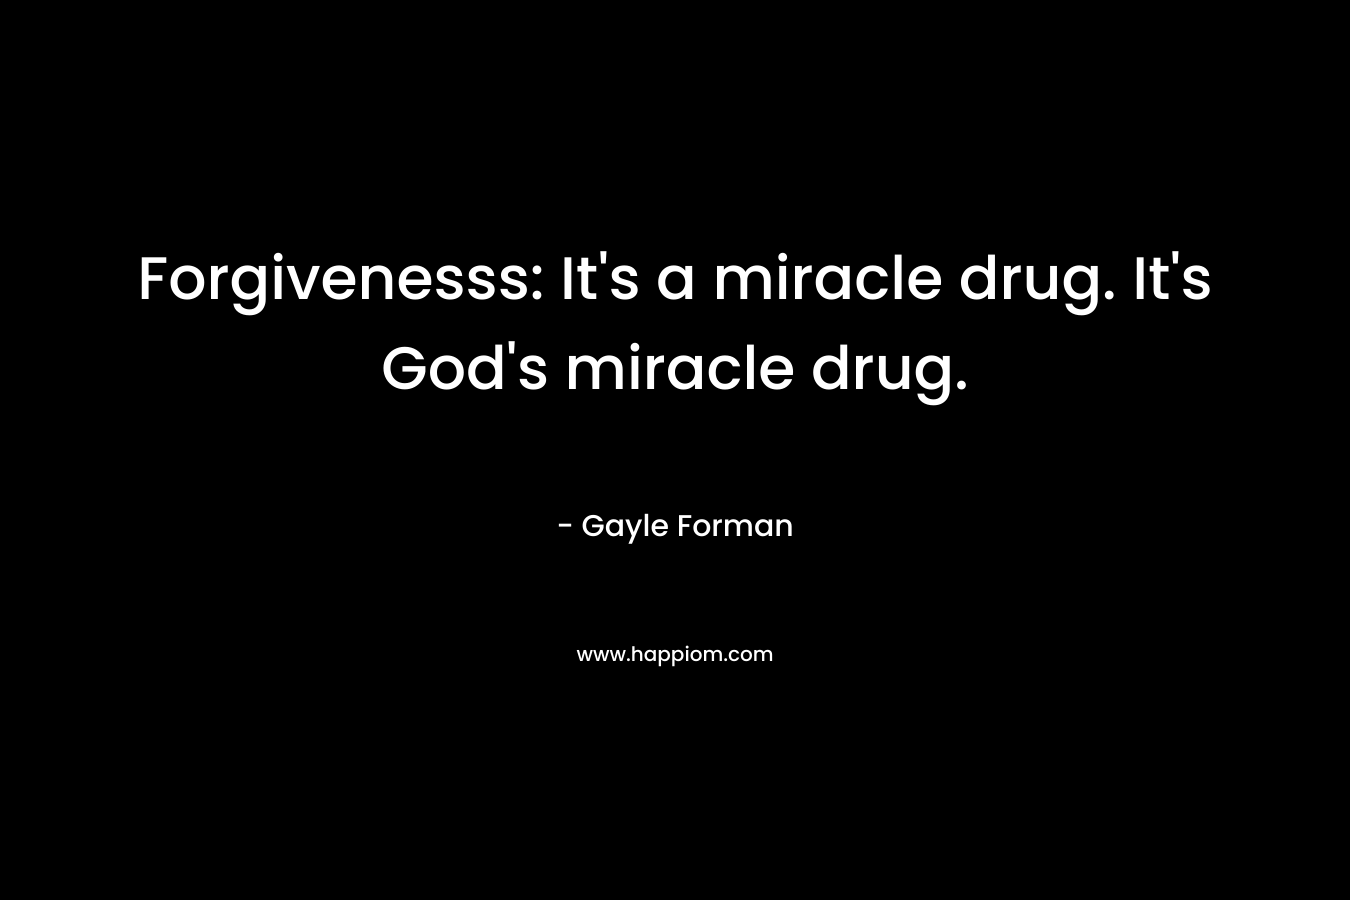 Forgivenesss: It's a miracle drug. It's God's miracle drug.